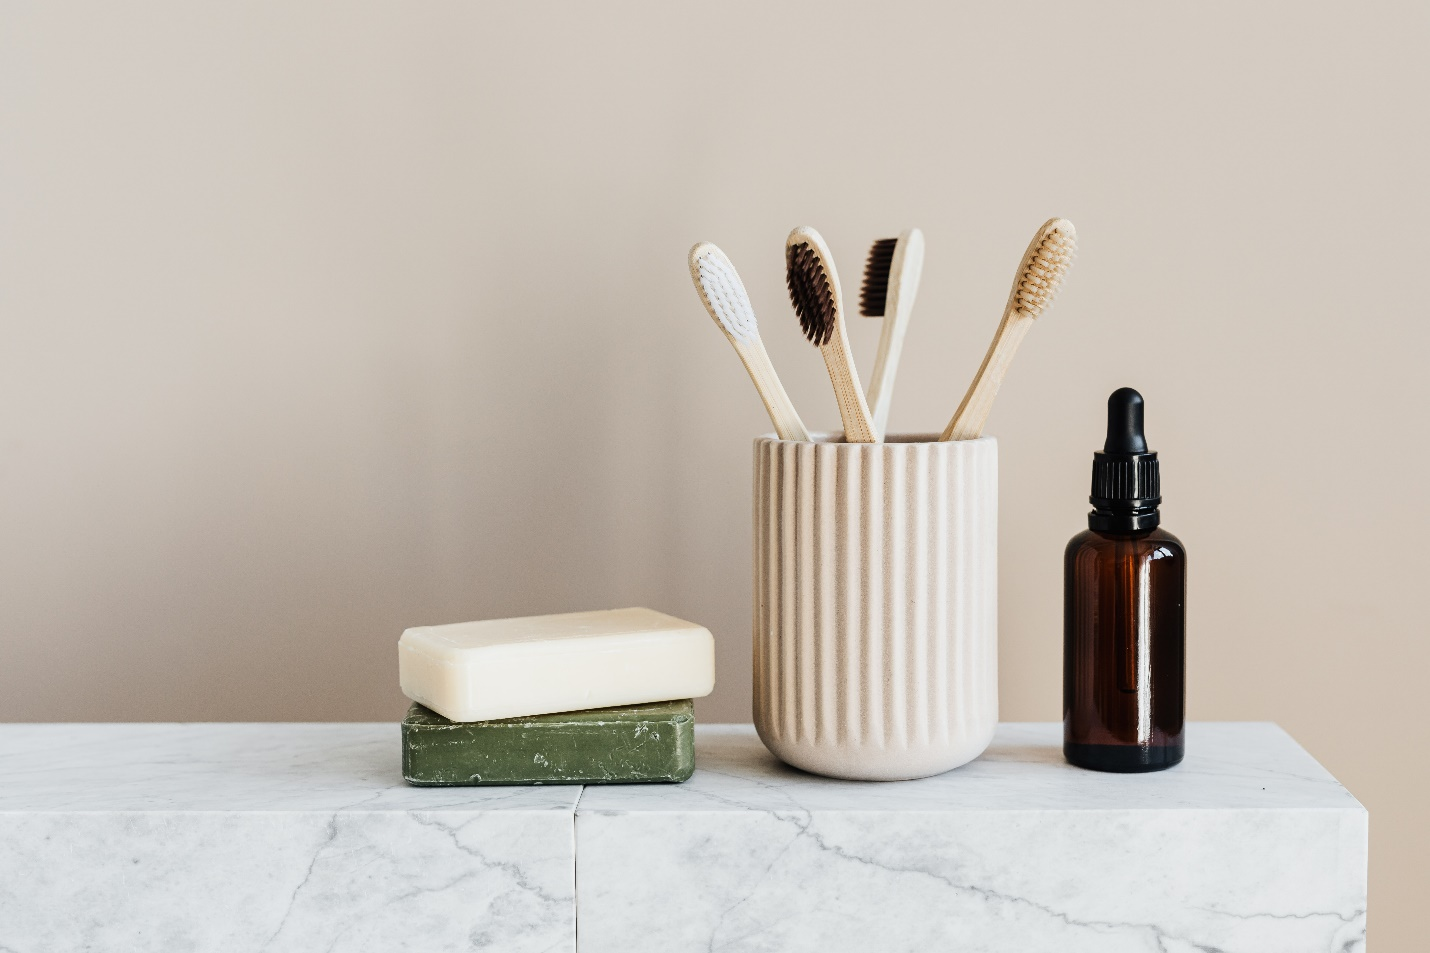 A set of bathroom toiletries sitting on a marble countertop